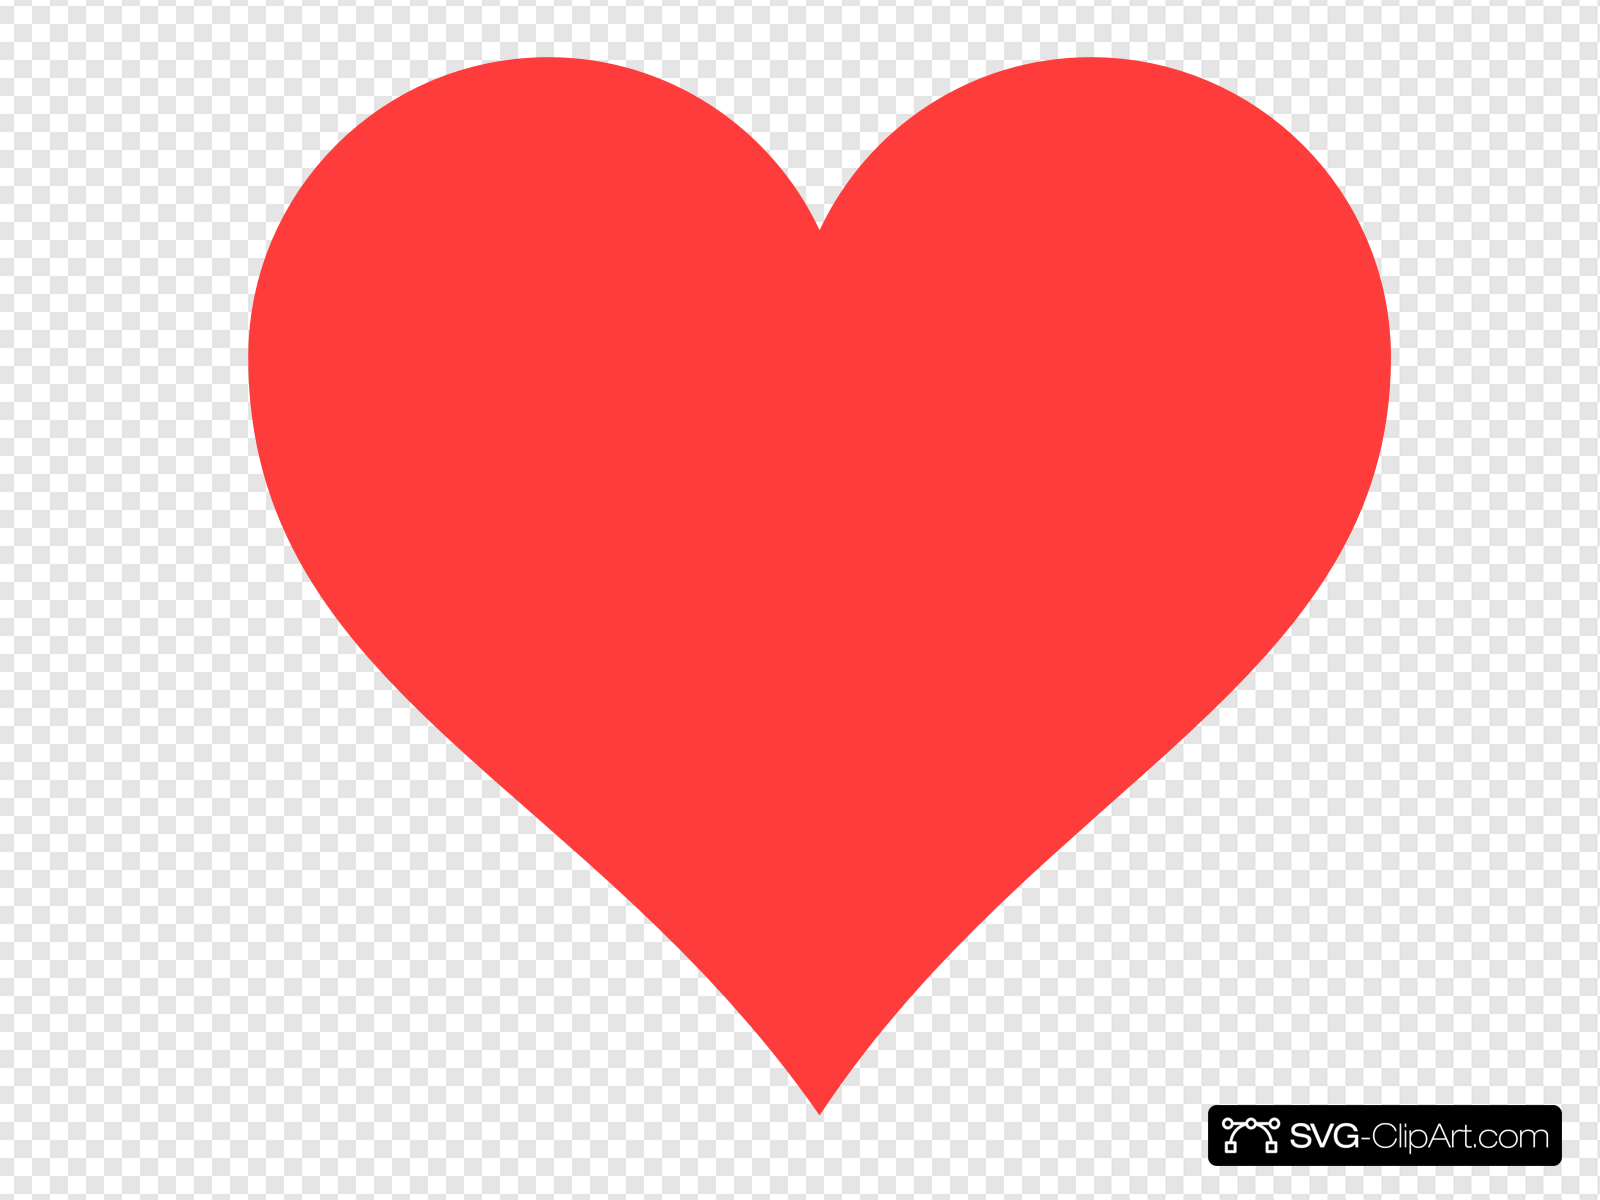 Red Heart Clip art, Icon and SVG.